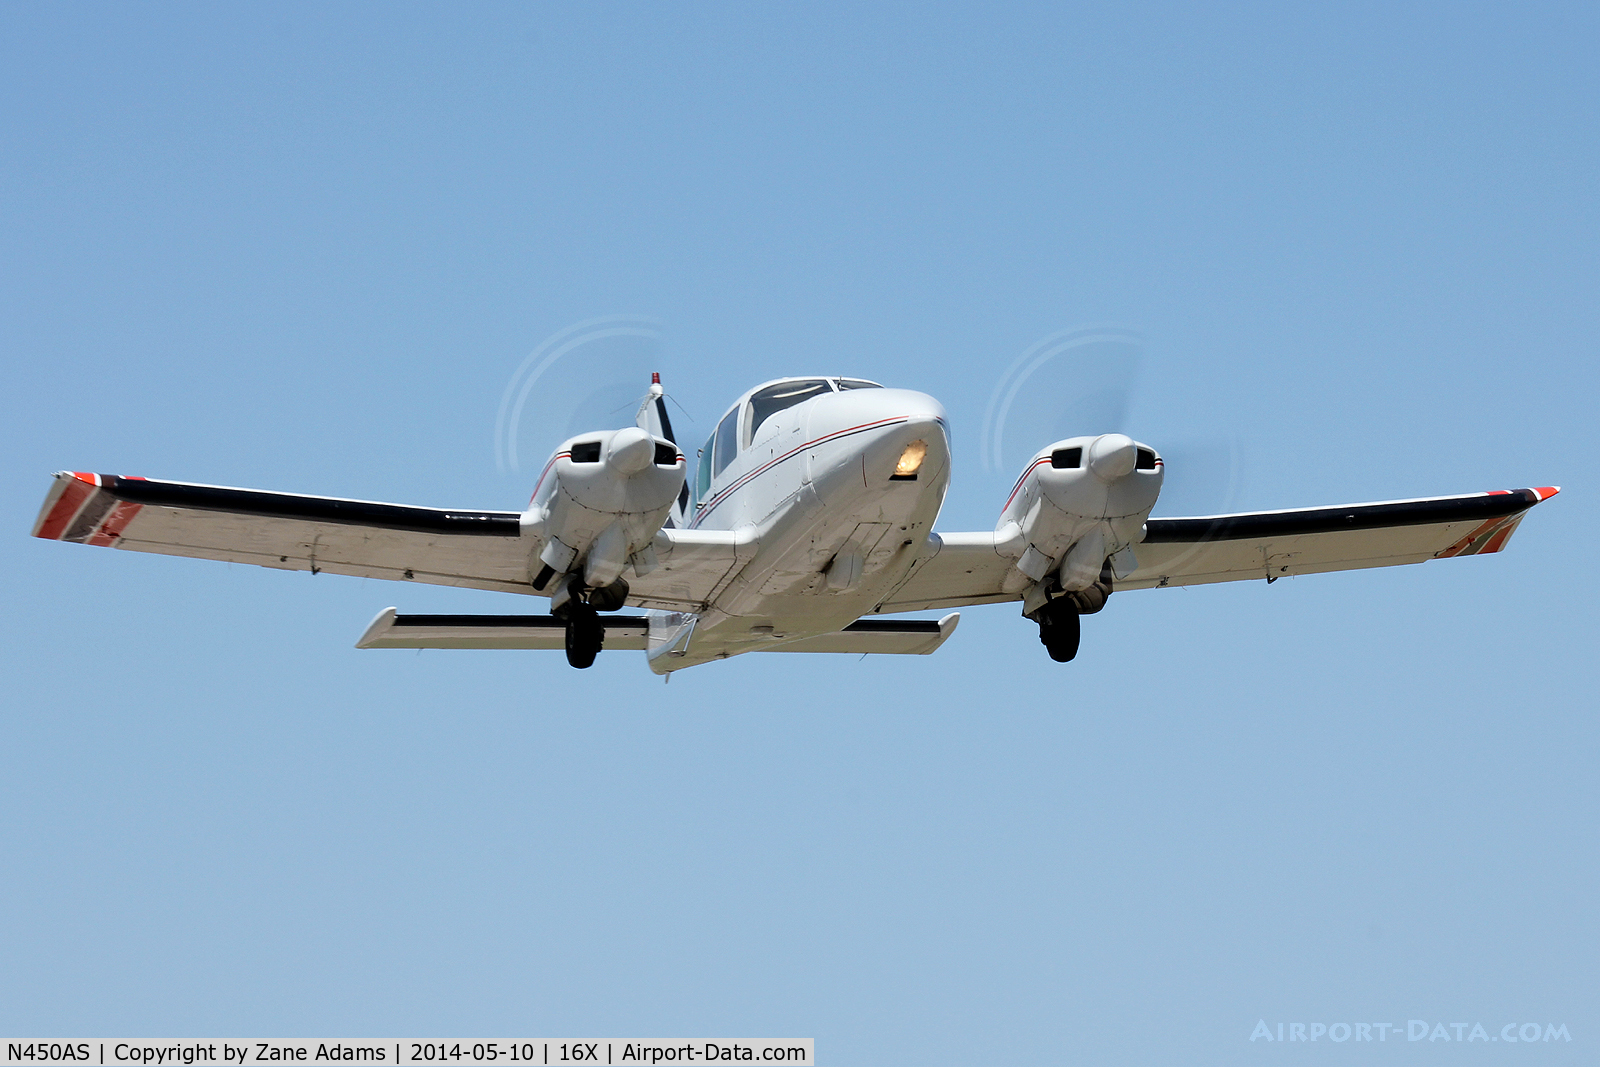 N450AS, 1978 Piper PA-23-250 C/N 27-7854123, At the 2014 Propwash Party